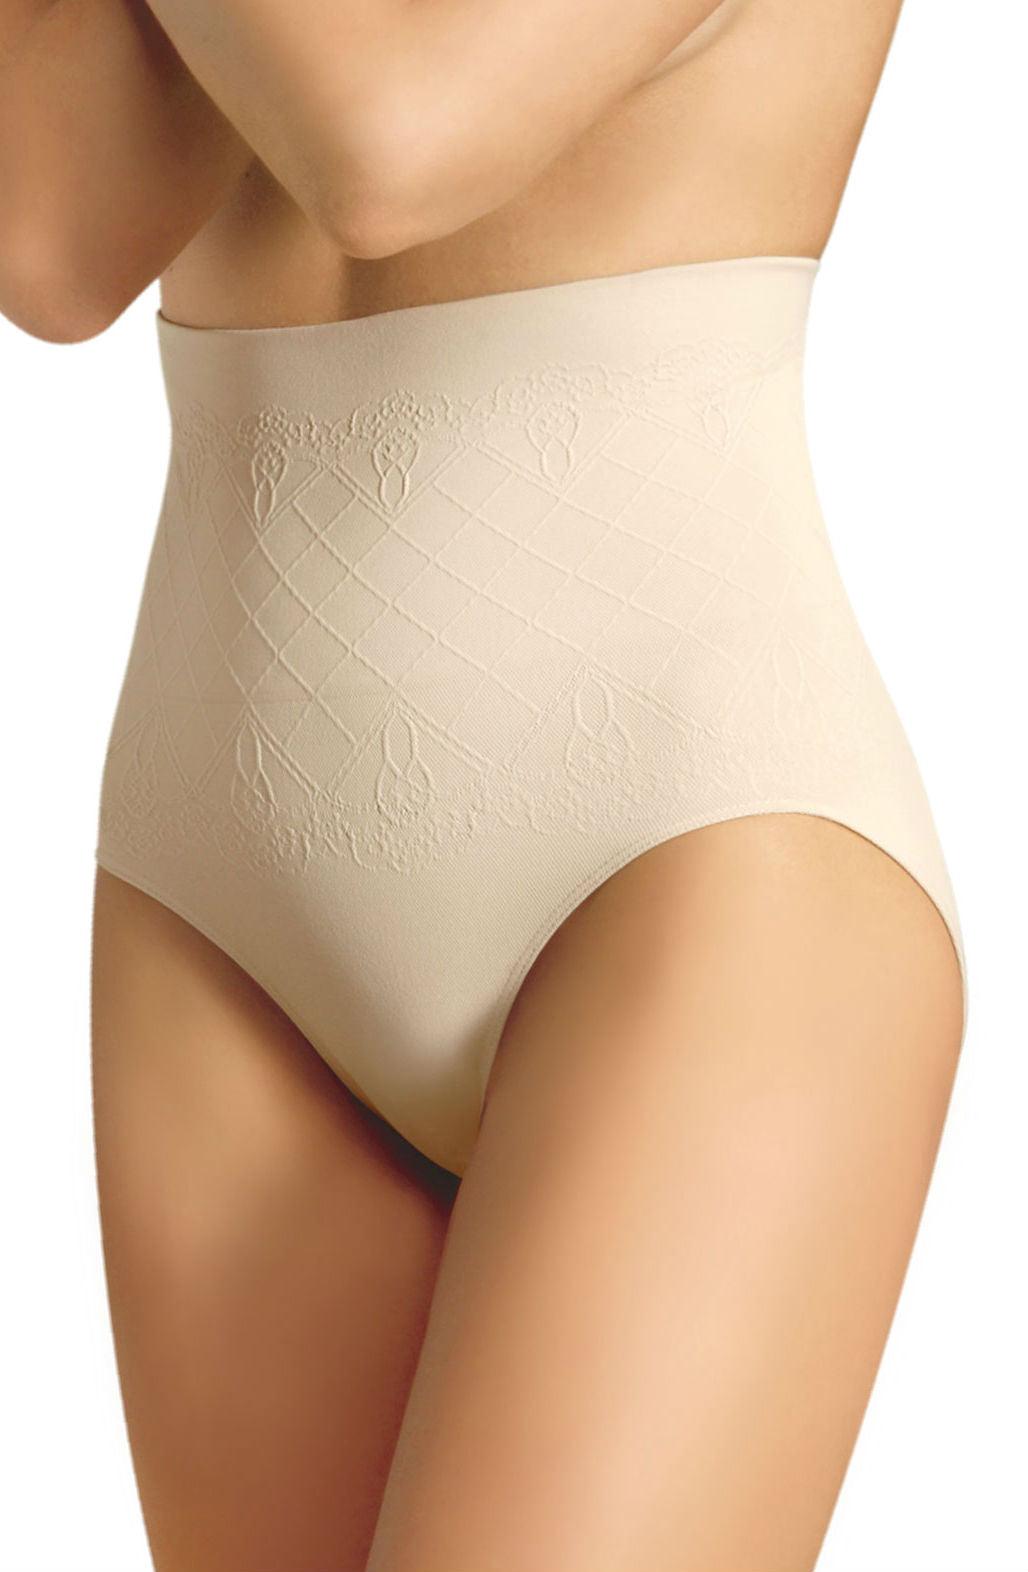 Control Body 311370S High Waist Shaping Brief Skin - Sydney Rose Lingerie 